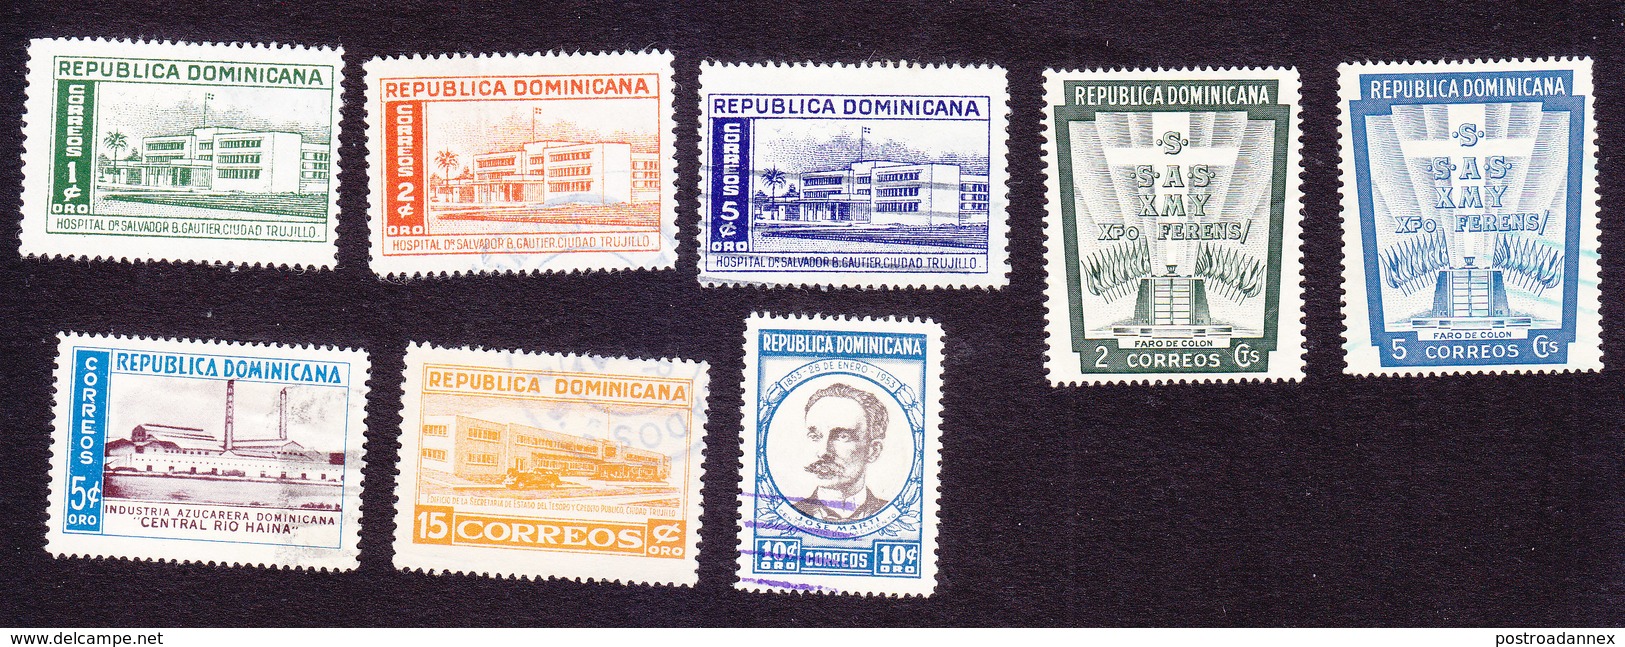 Dominican Republic, Scott #447-451, 455-457, Used, Hospital, Columbus Lighthouse, Industry, Marti, Issued 1952-54 - Dominican Republic